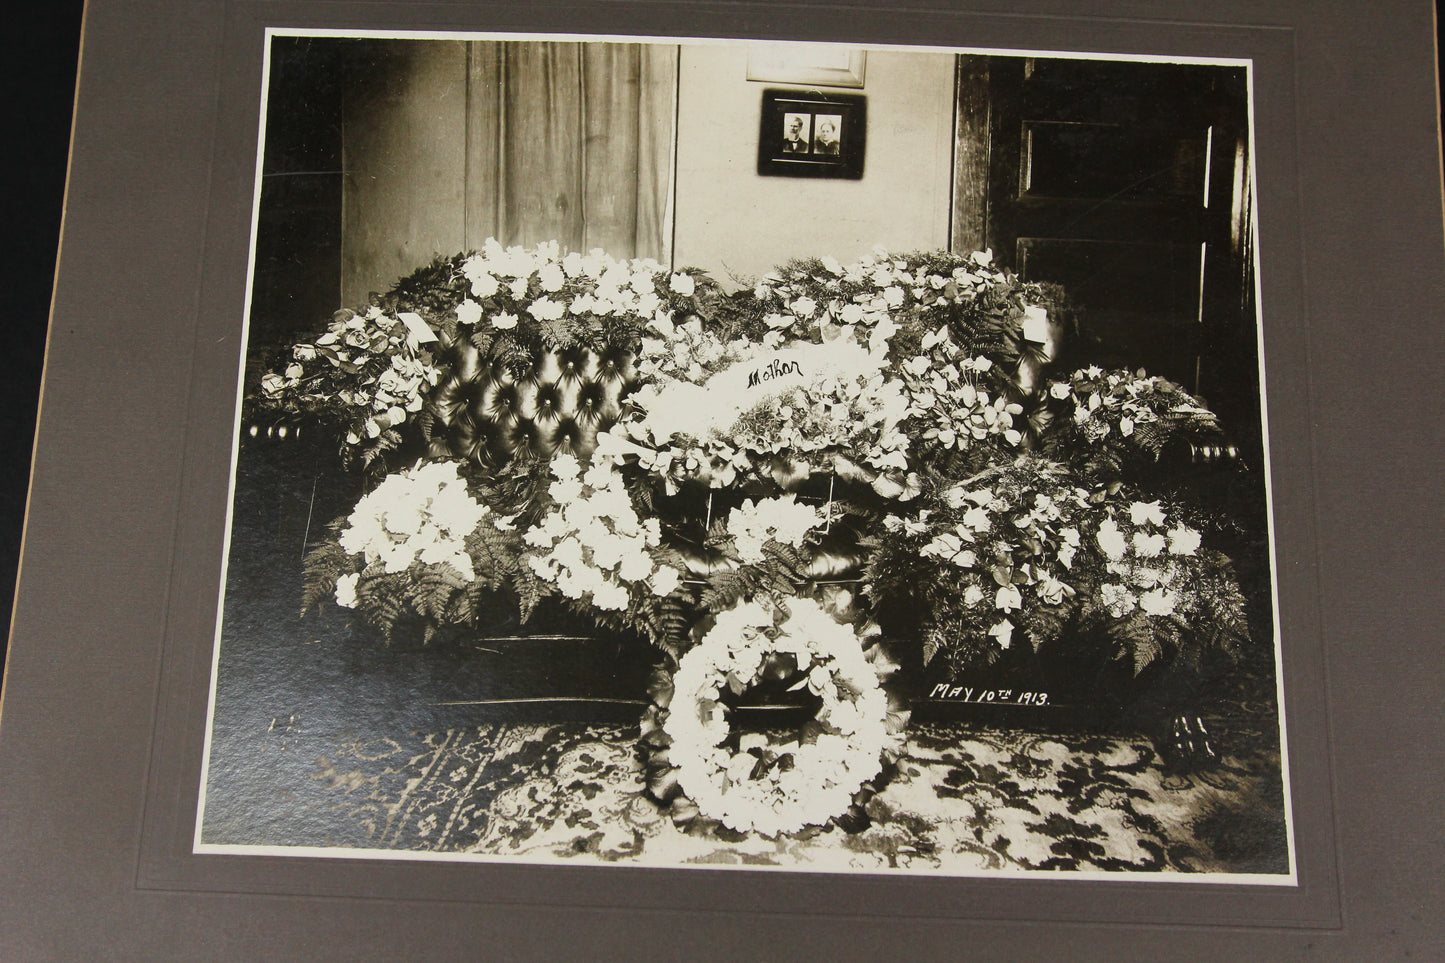 Antique Matted Funeral Flower Arrangement Photograph for Mother, Dated May 10th, 1913